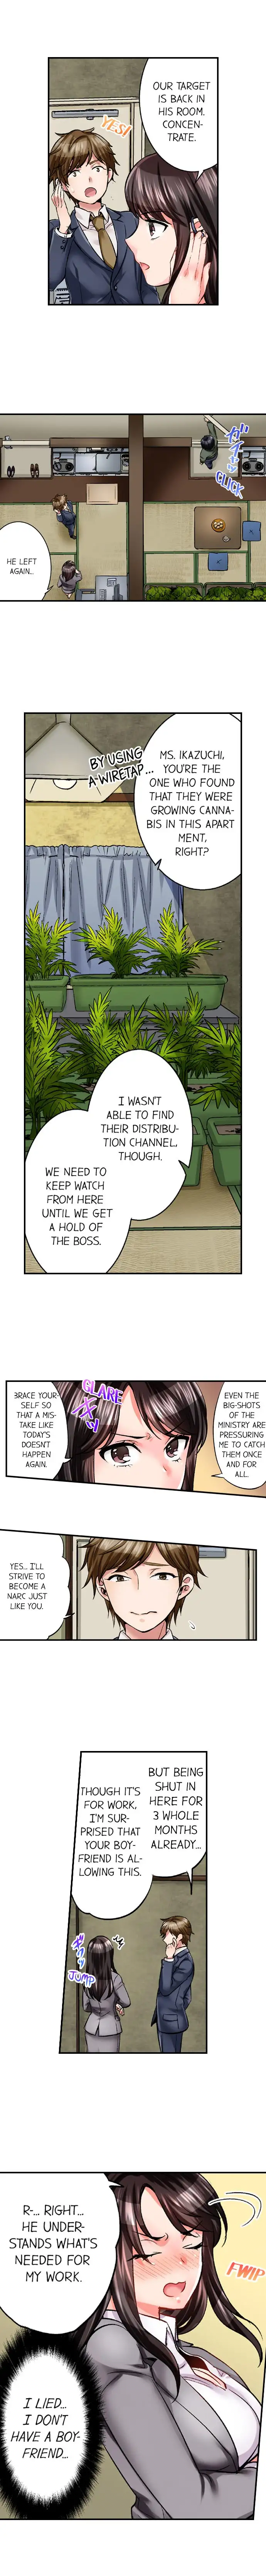 Sex is Part of Undercover Agent’s Job? - Chapter 1 Page 2